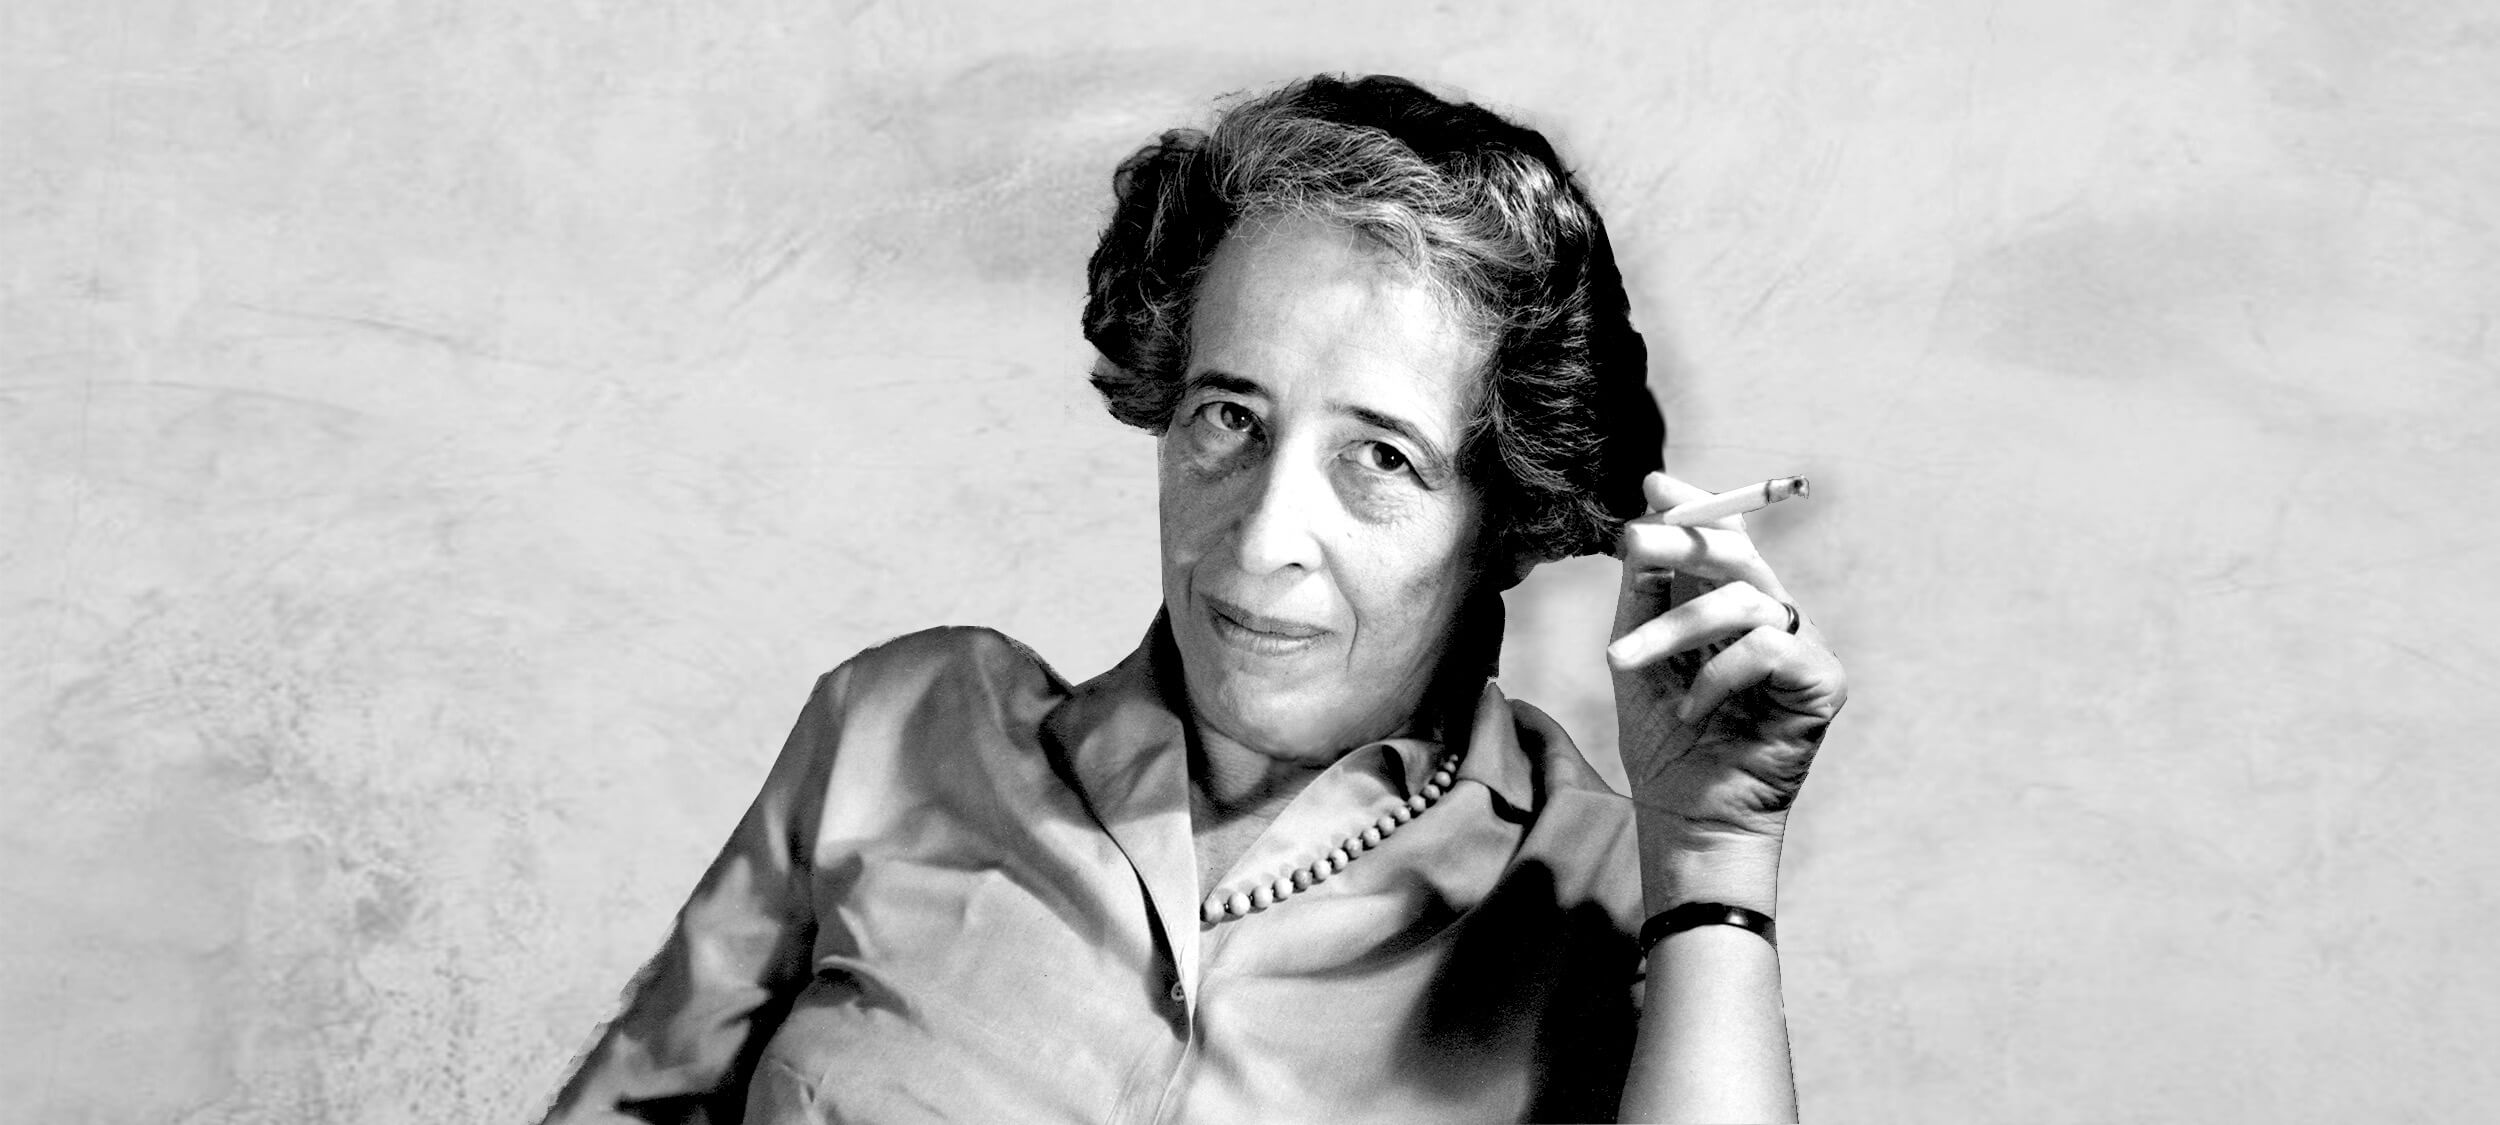 16 Mind-blowing Facts About Hannah Arendt - Facts.net